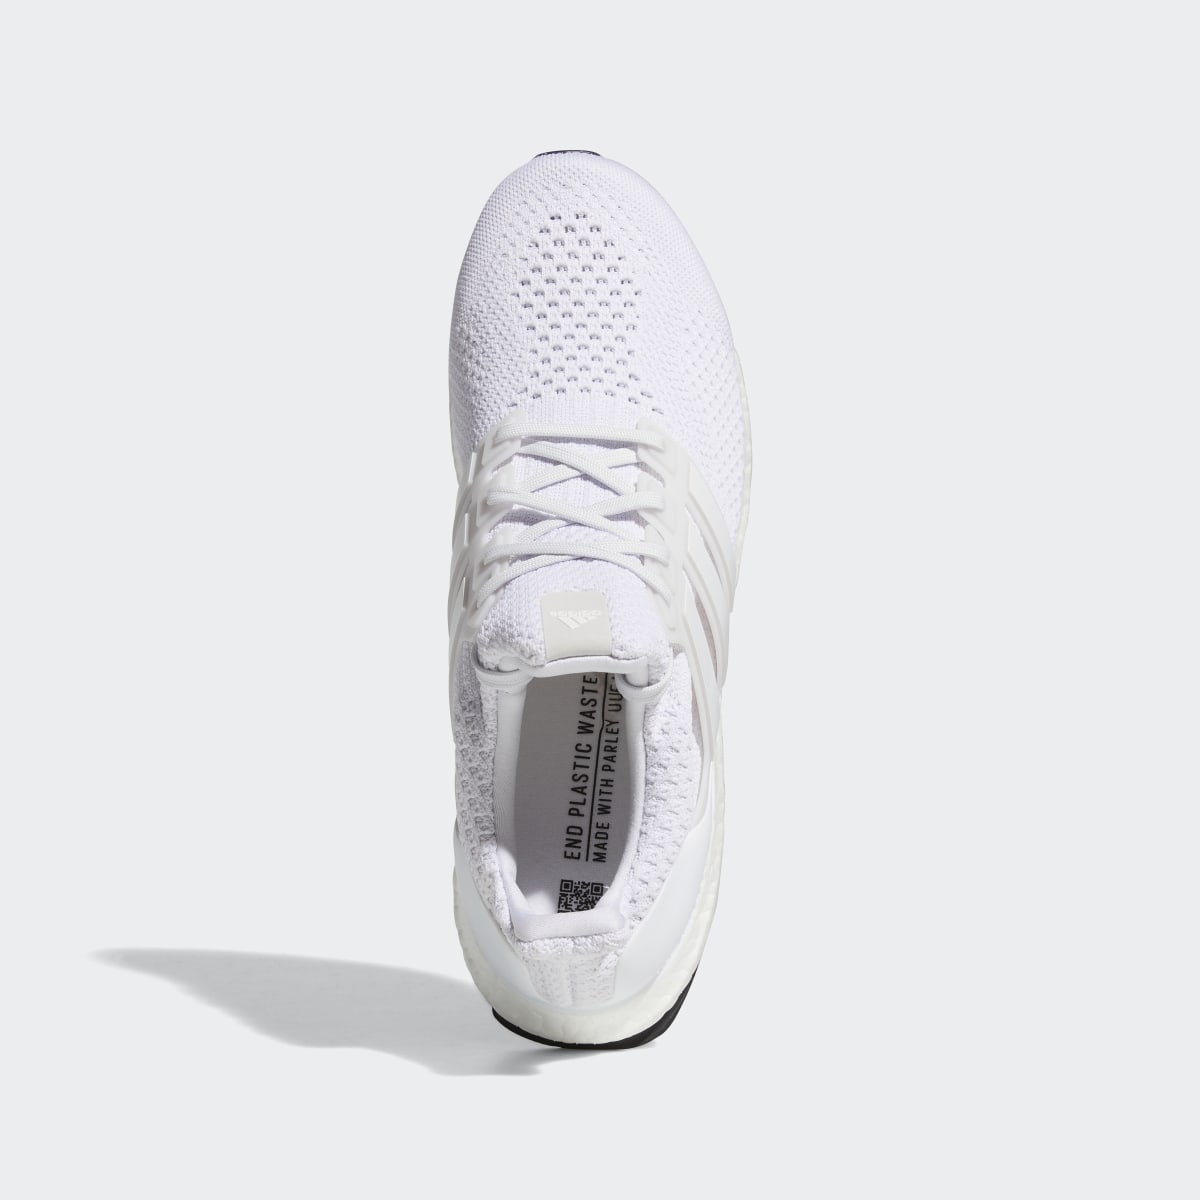 Adidas Ultraboost 5 DNA Running Lifestyle Shoes. 4